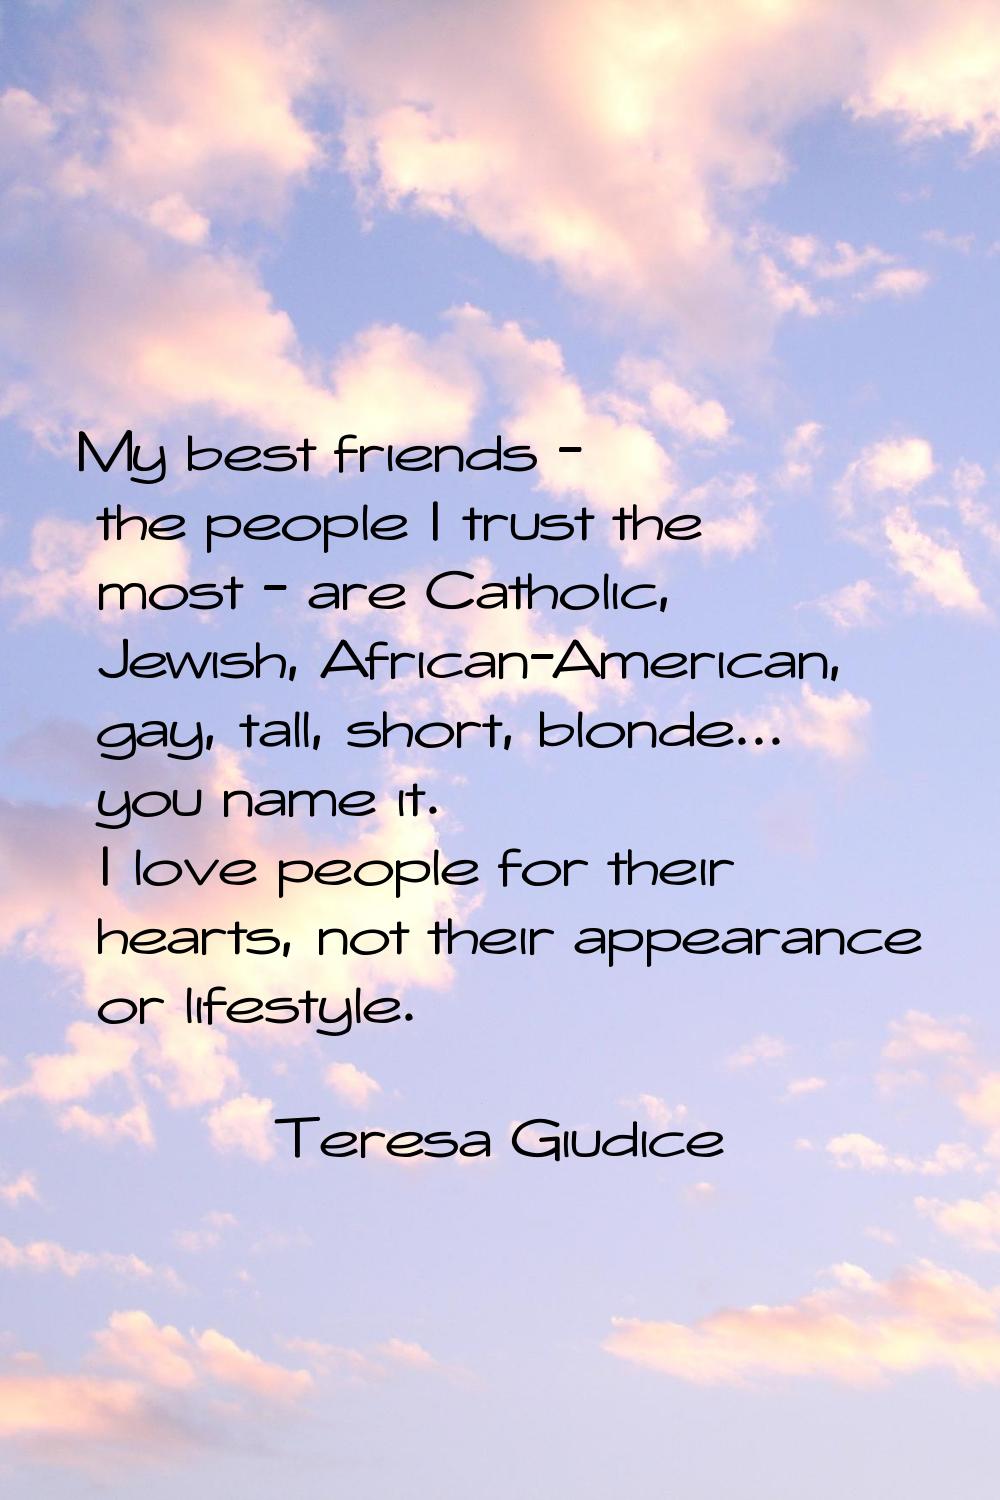 My best friends - the people I trust the most - are Catholic, Jewish, African-American, gay, tall, 